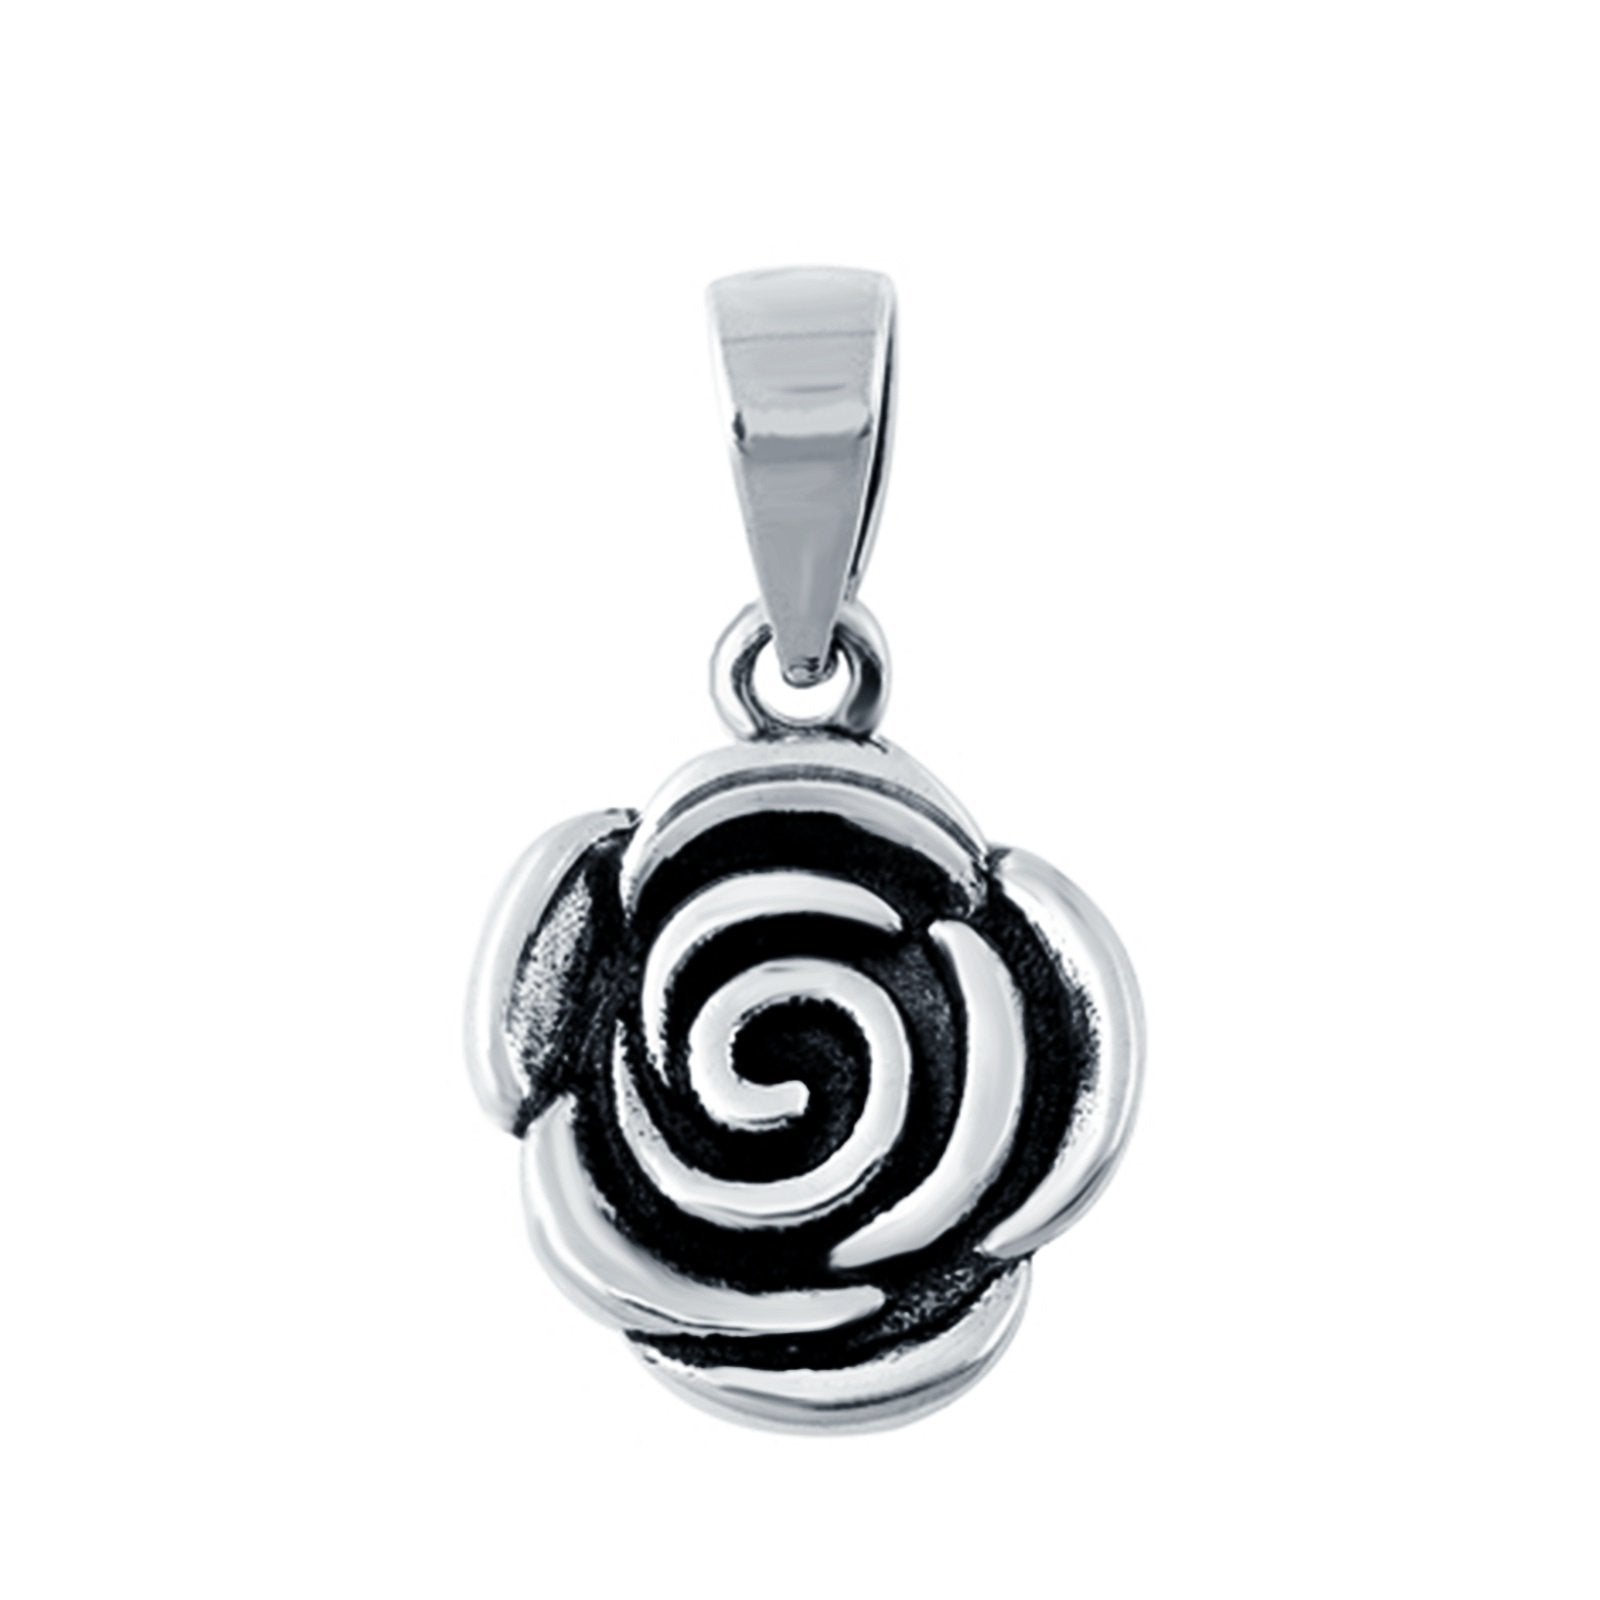 Silver Rose Charm Pendant 925 Sterling Silver Fashion Jewelry